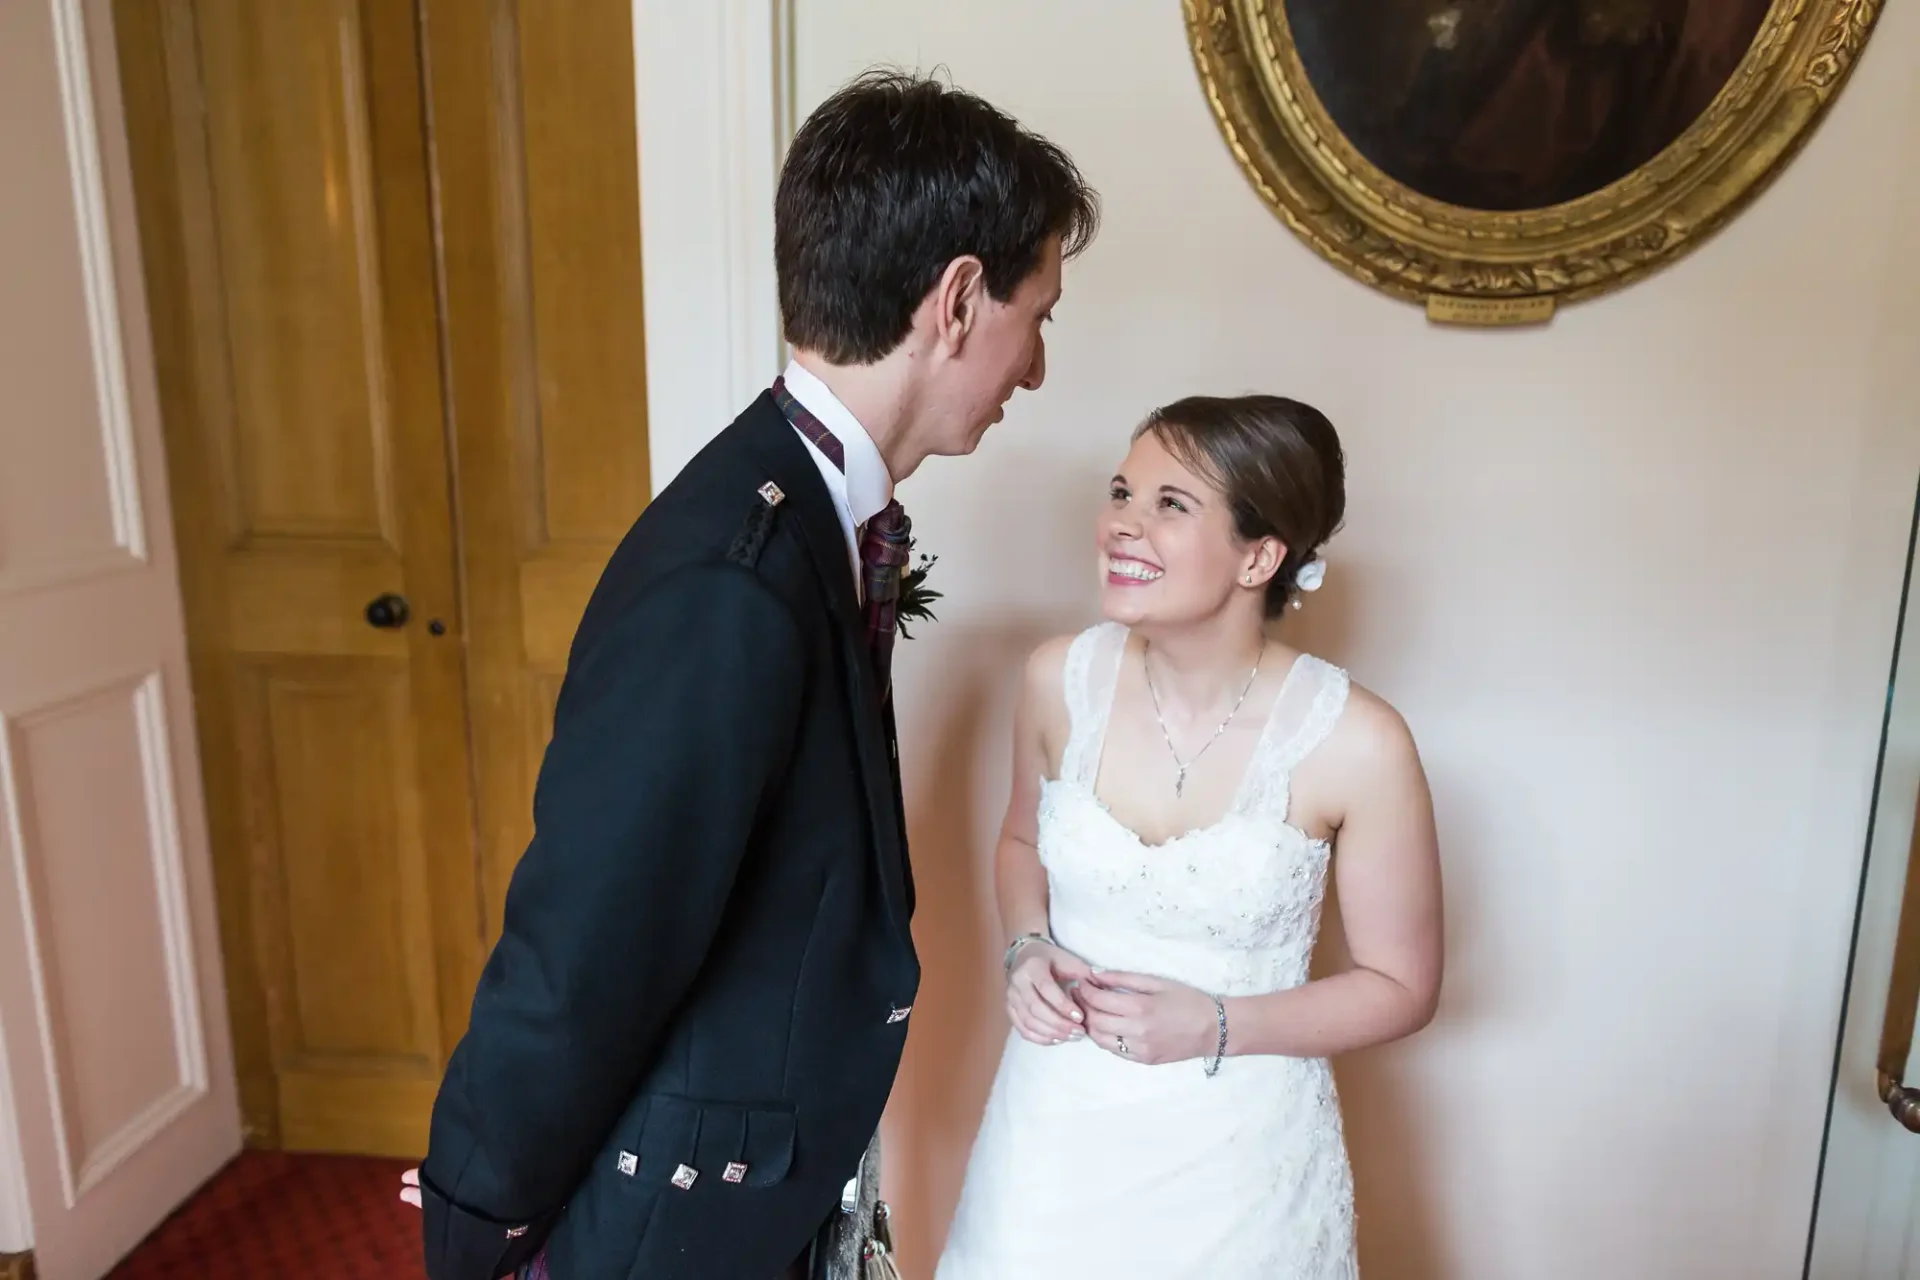 A bride in a white dress and a groom in a black suit share a joyful moment, smiling at each other indoors.